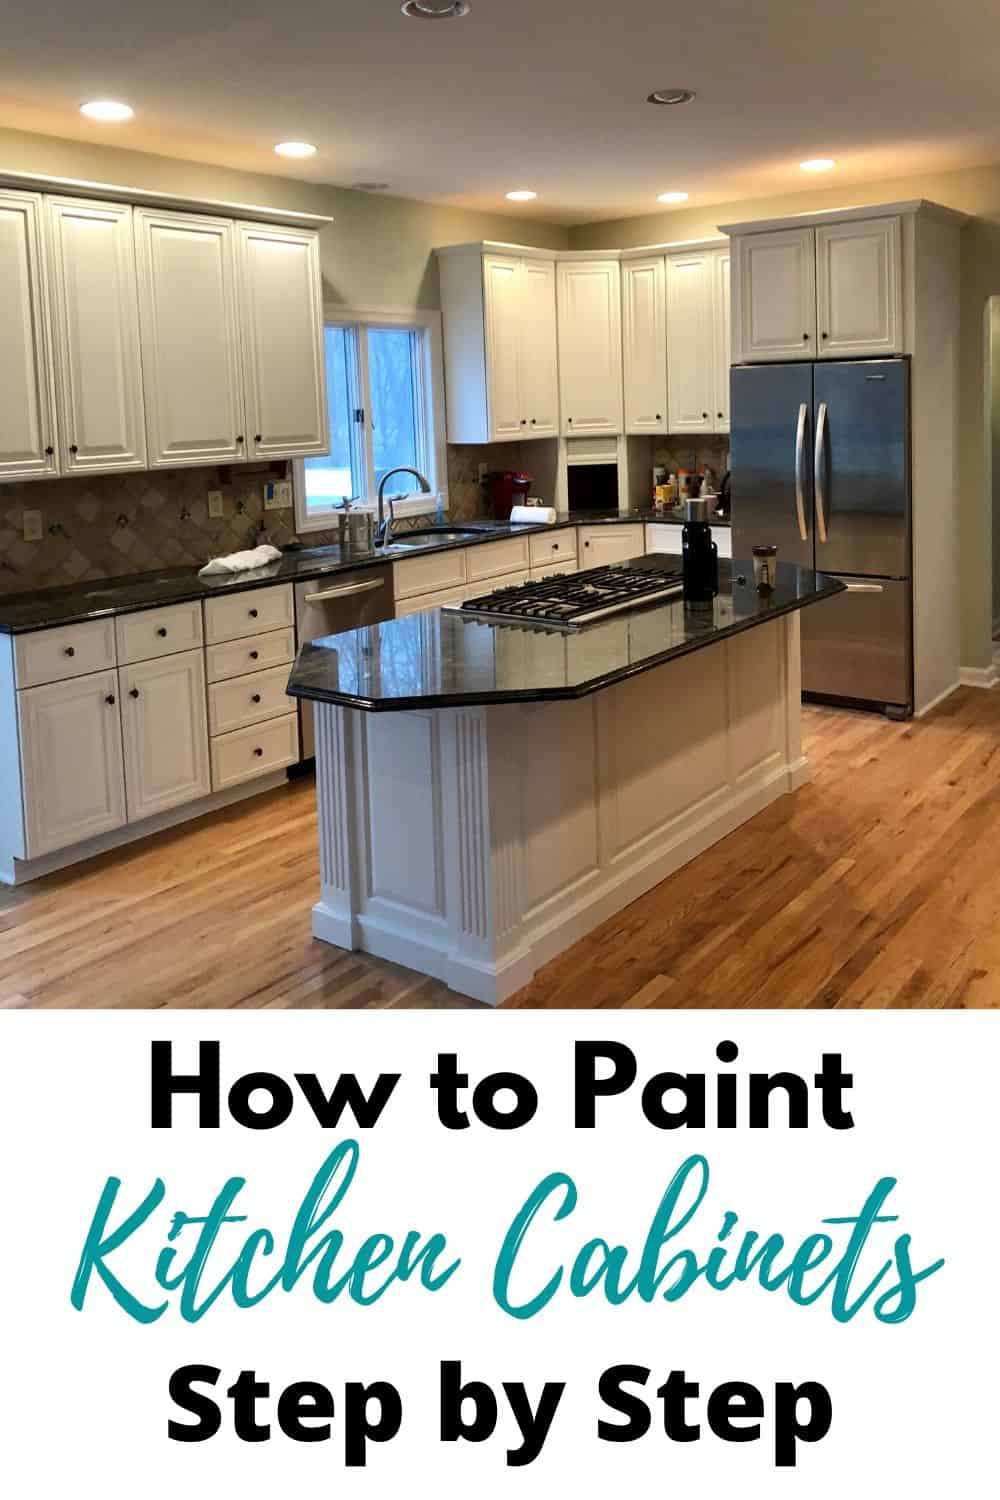 How to Paint Kitchen Cabinets -Tips for a Smooth Finish - West Magnolia Charm - How To Get A Smooth Finish When Painting Kitchen Cabinets